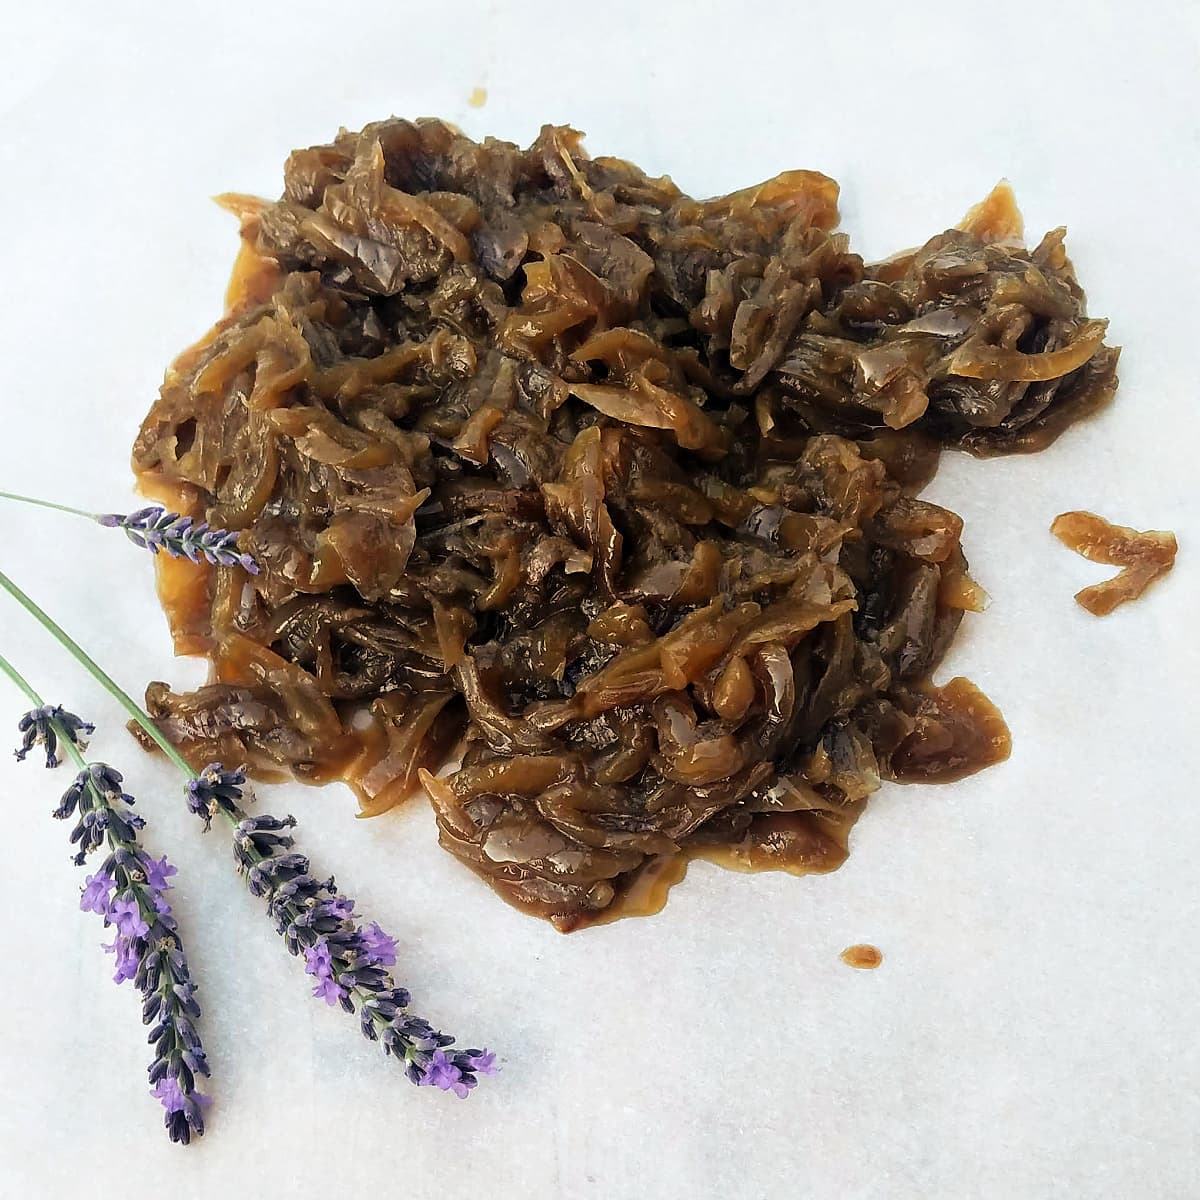 Caramelized onions on a sheet of parchment, with a frond of lavender on the side.